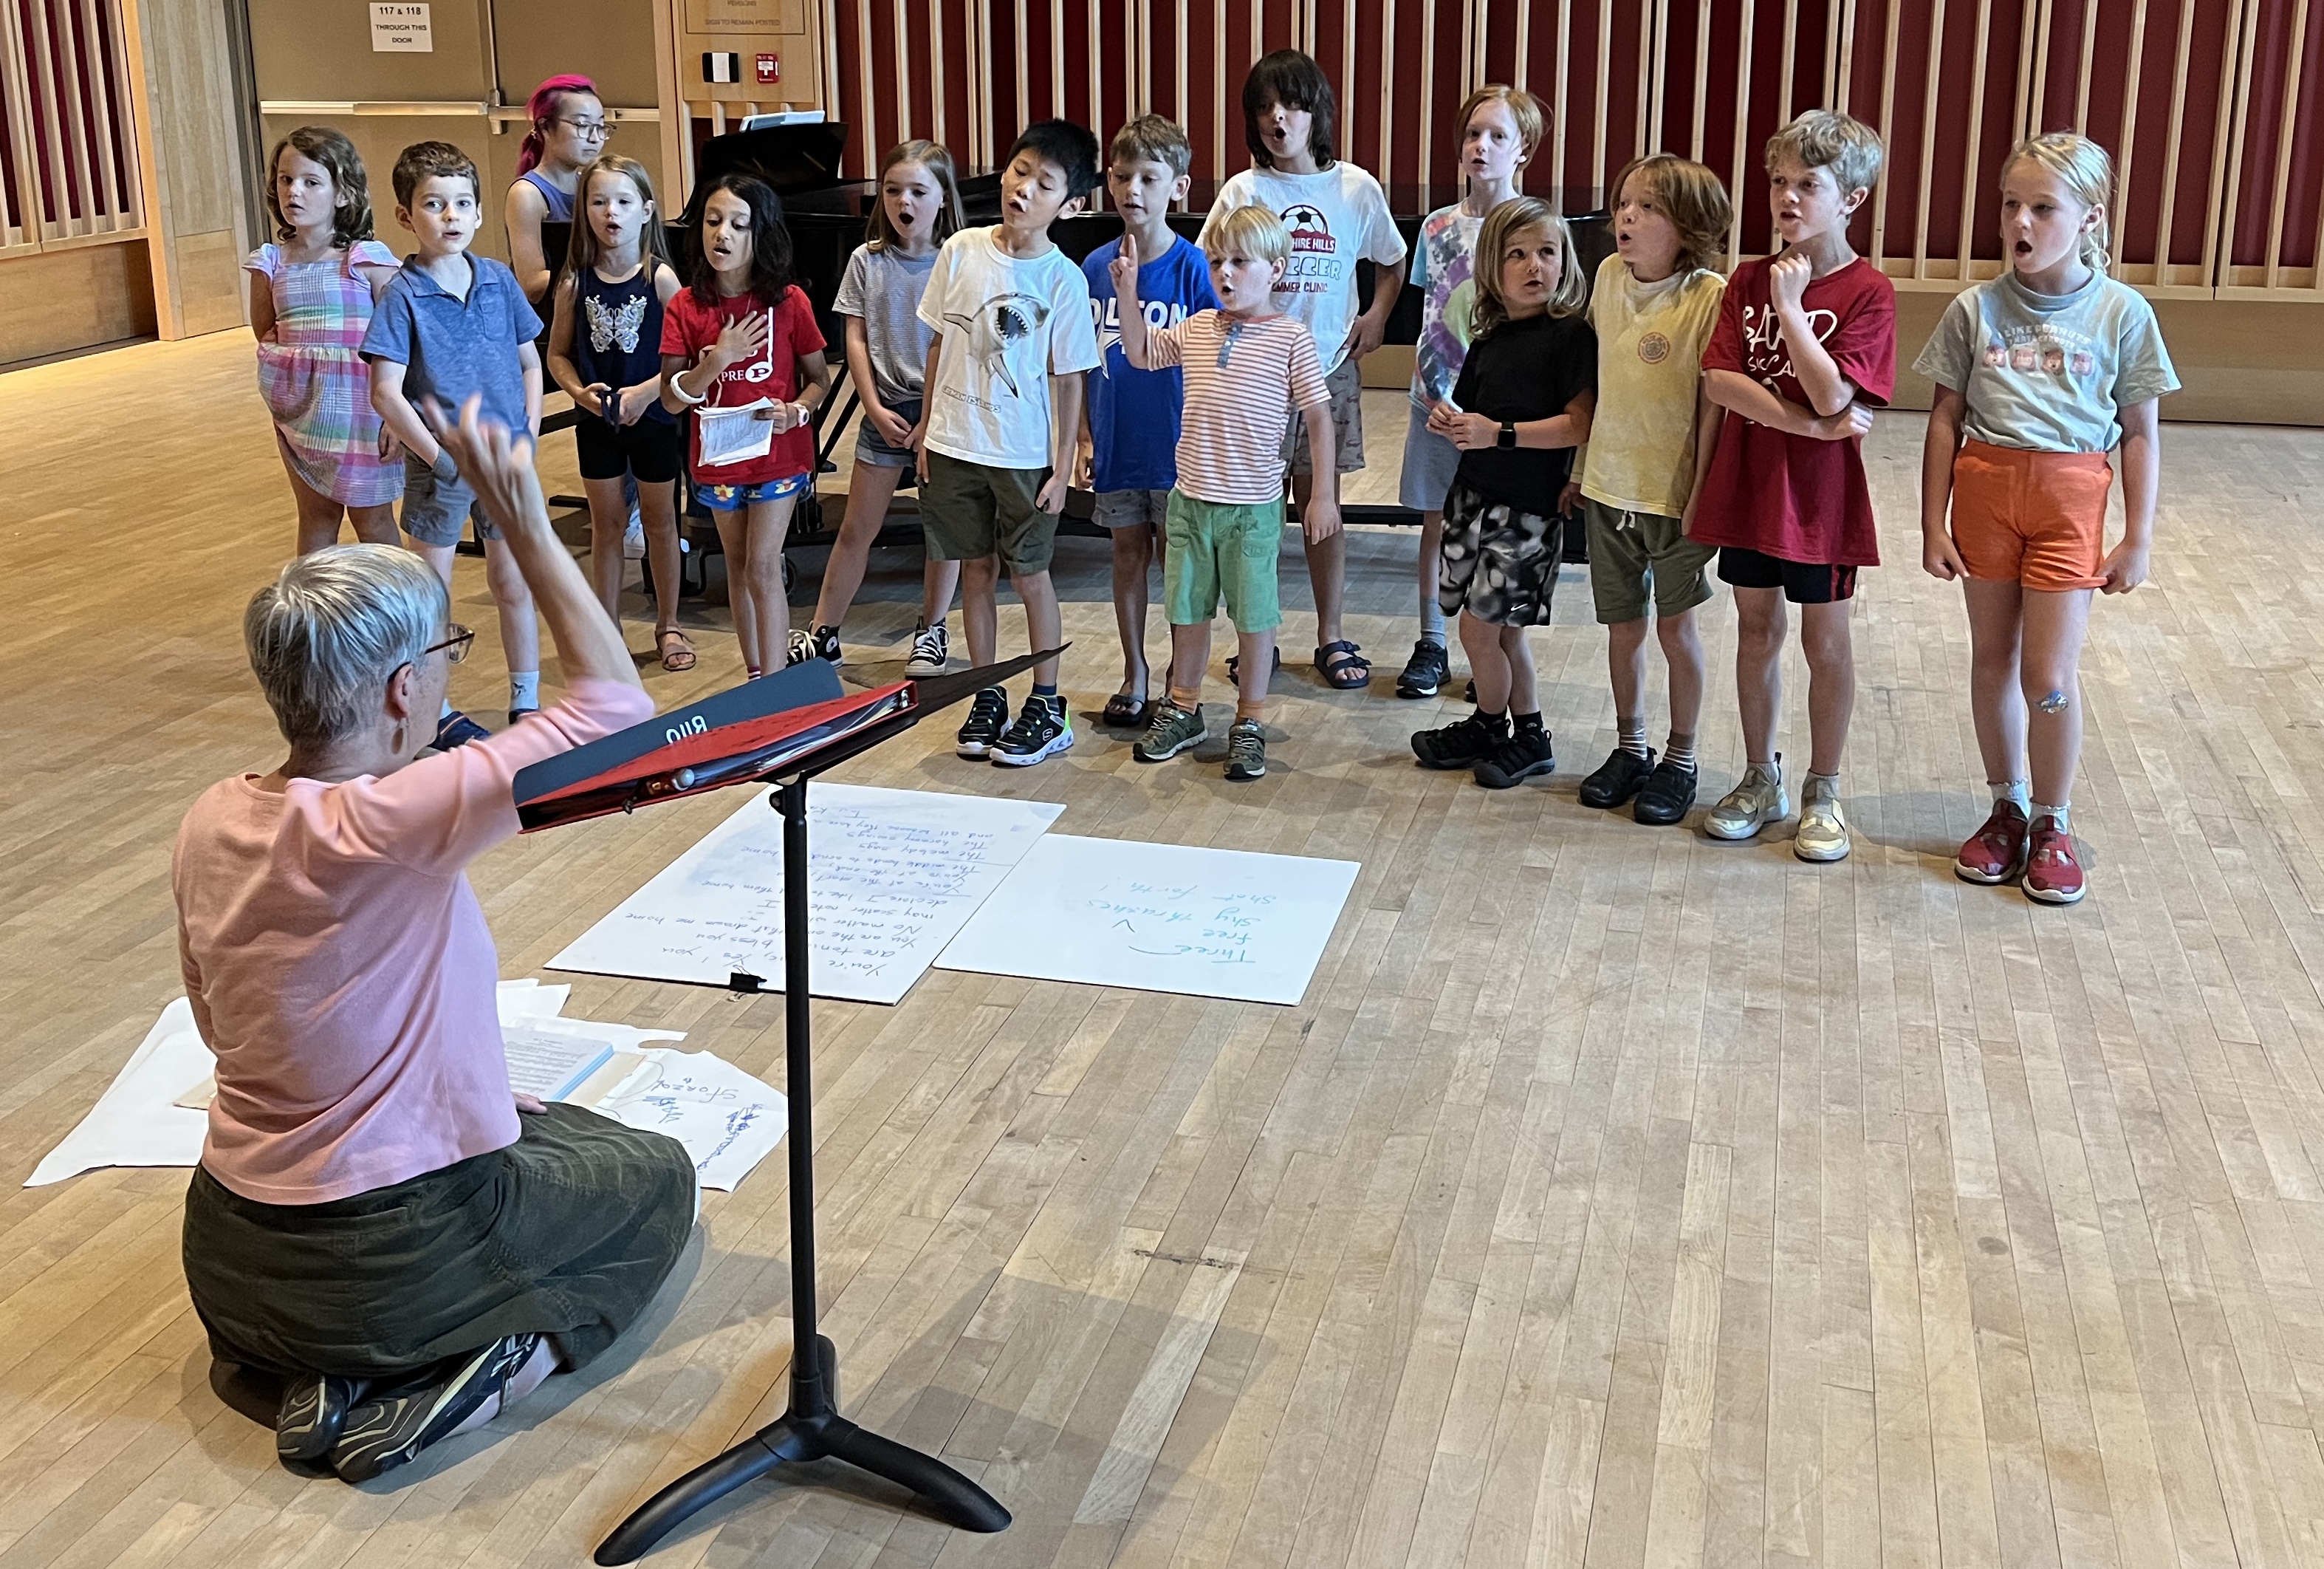 Main Image for Bard Music Camp  